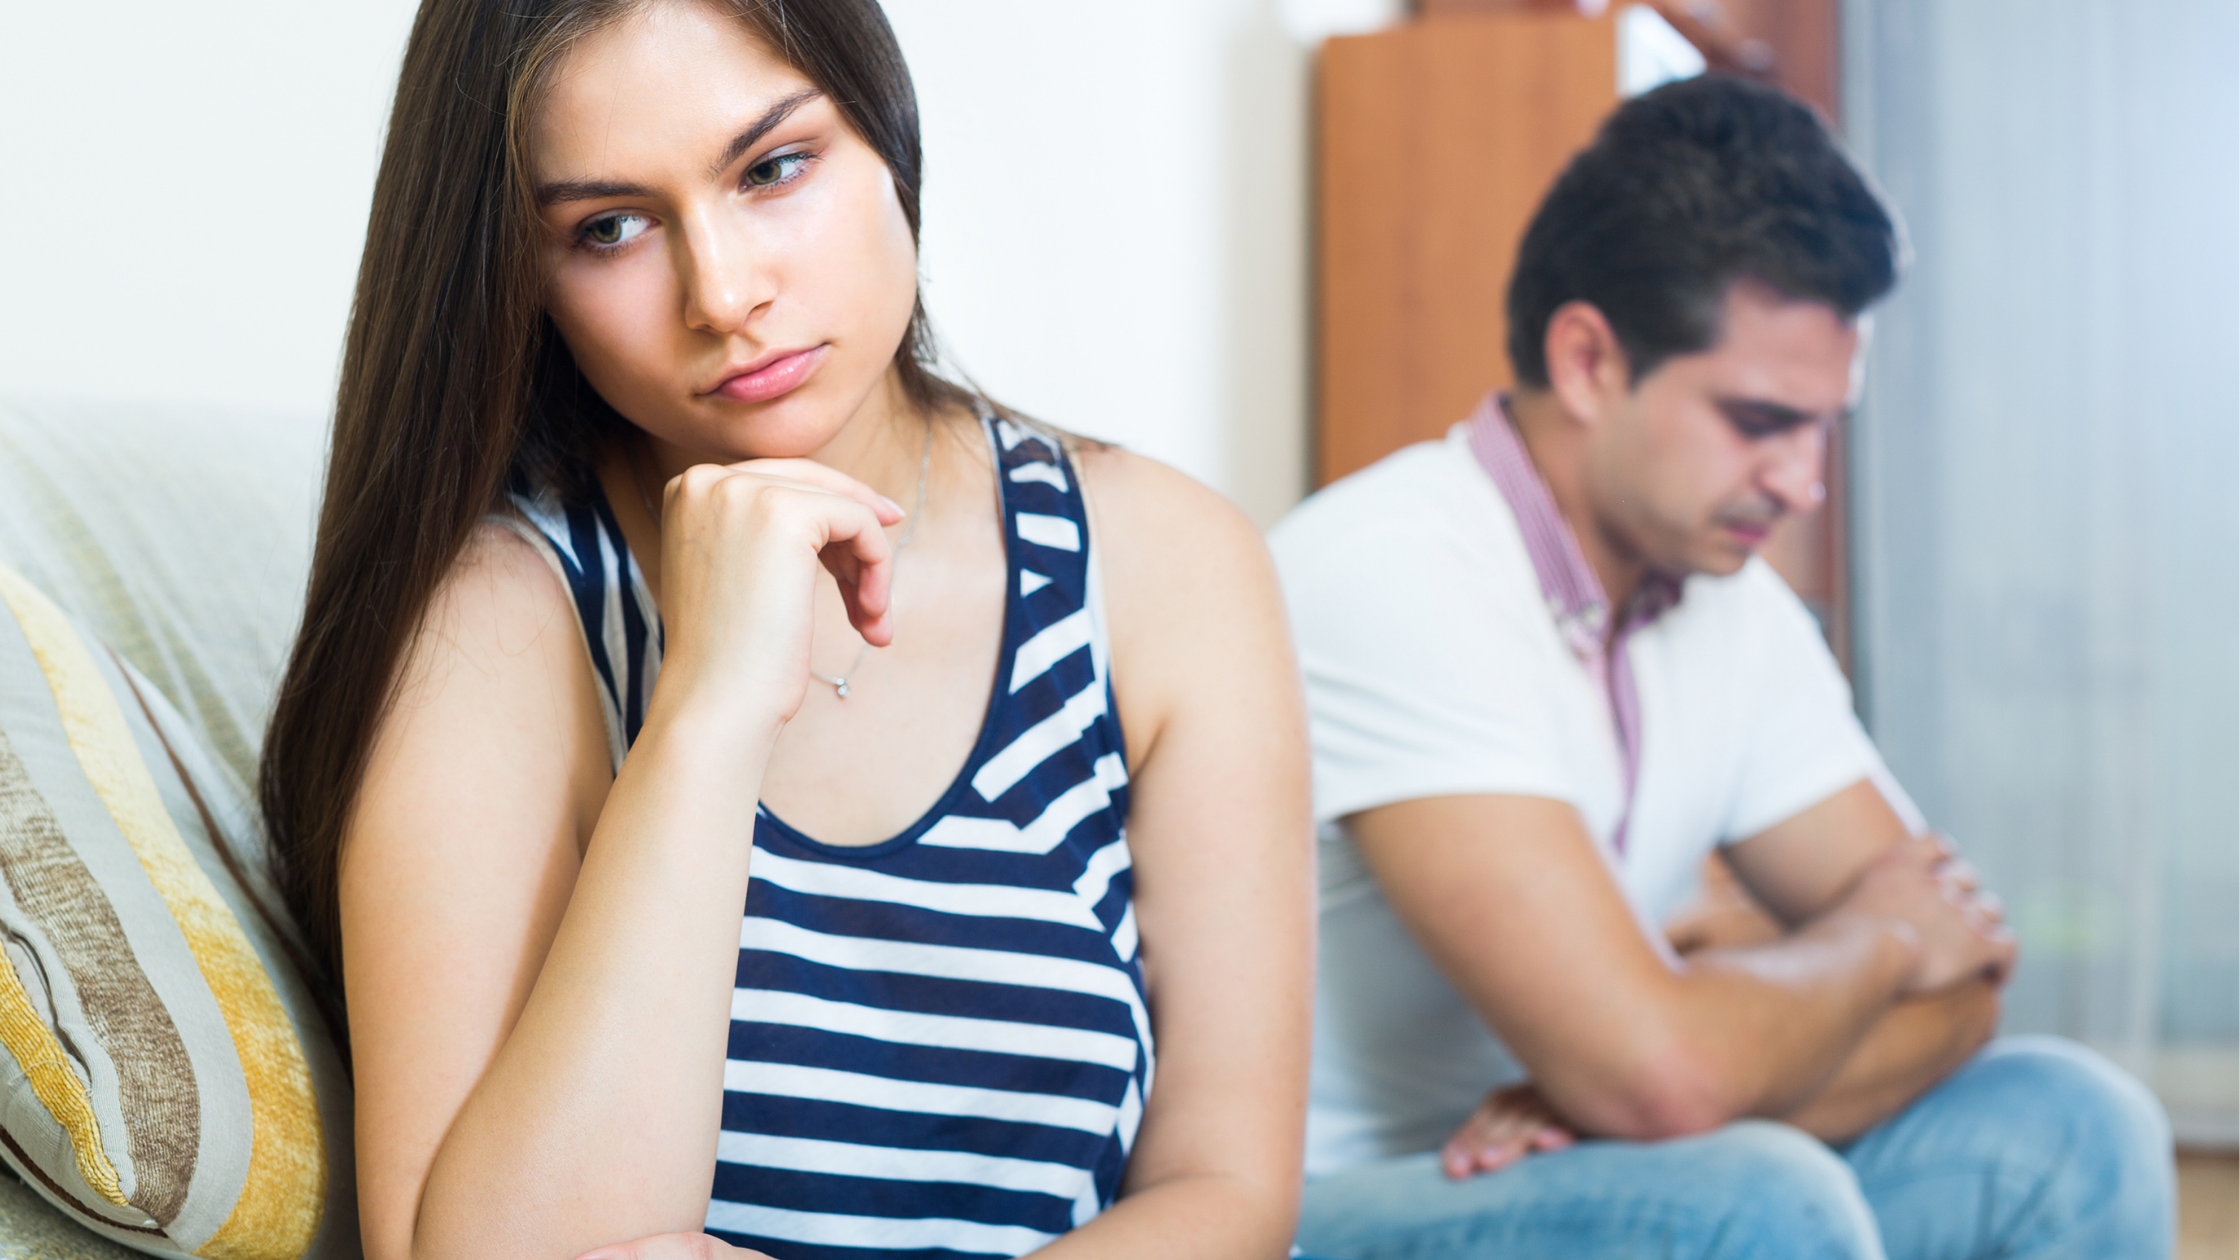 Causes of Loneliness In Marriages/Relationships And How To Avoid It